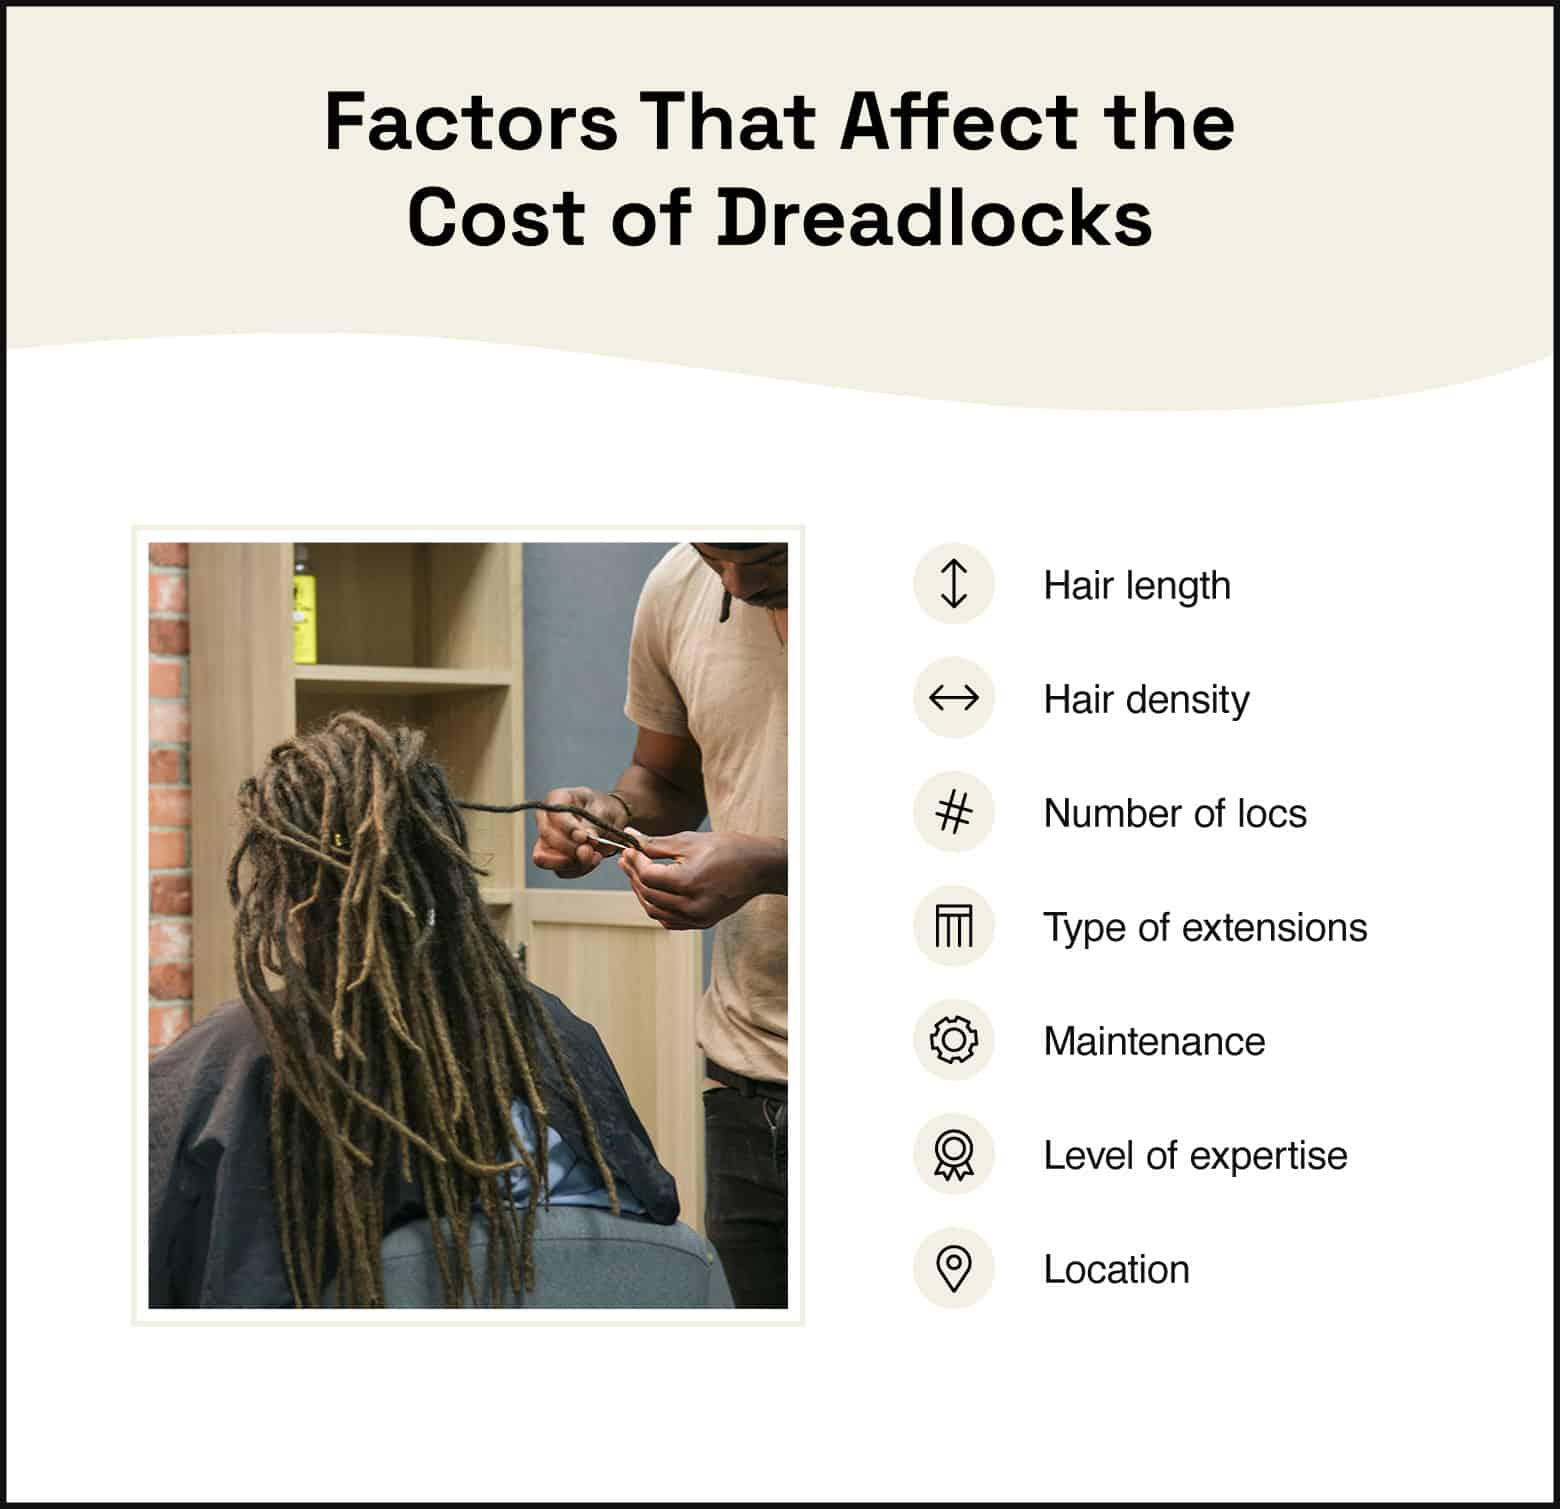 photo of person in the salon getting dreads looked at, copy on the right summarizing factors that affect the cost of dreadlocks